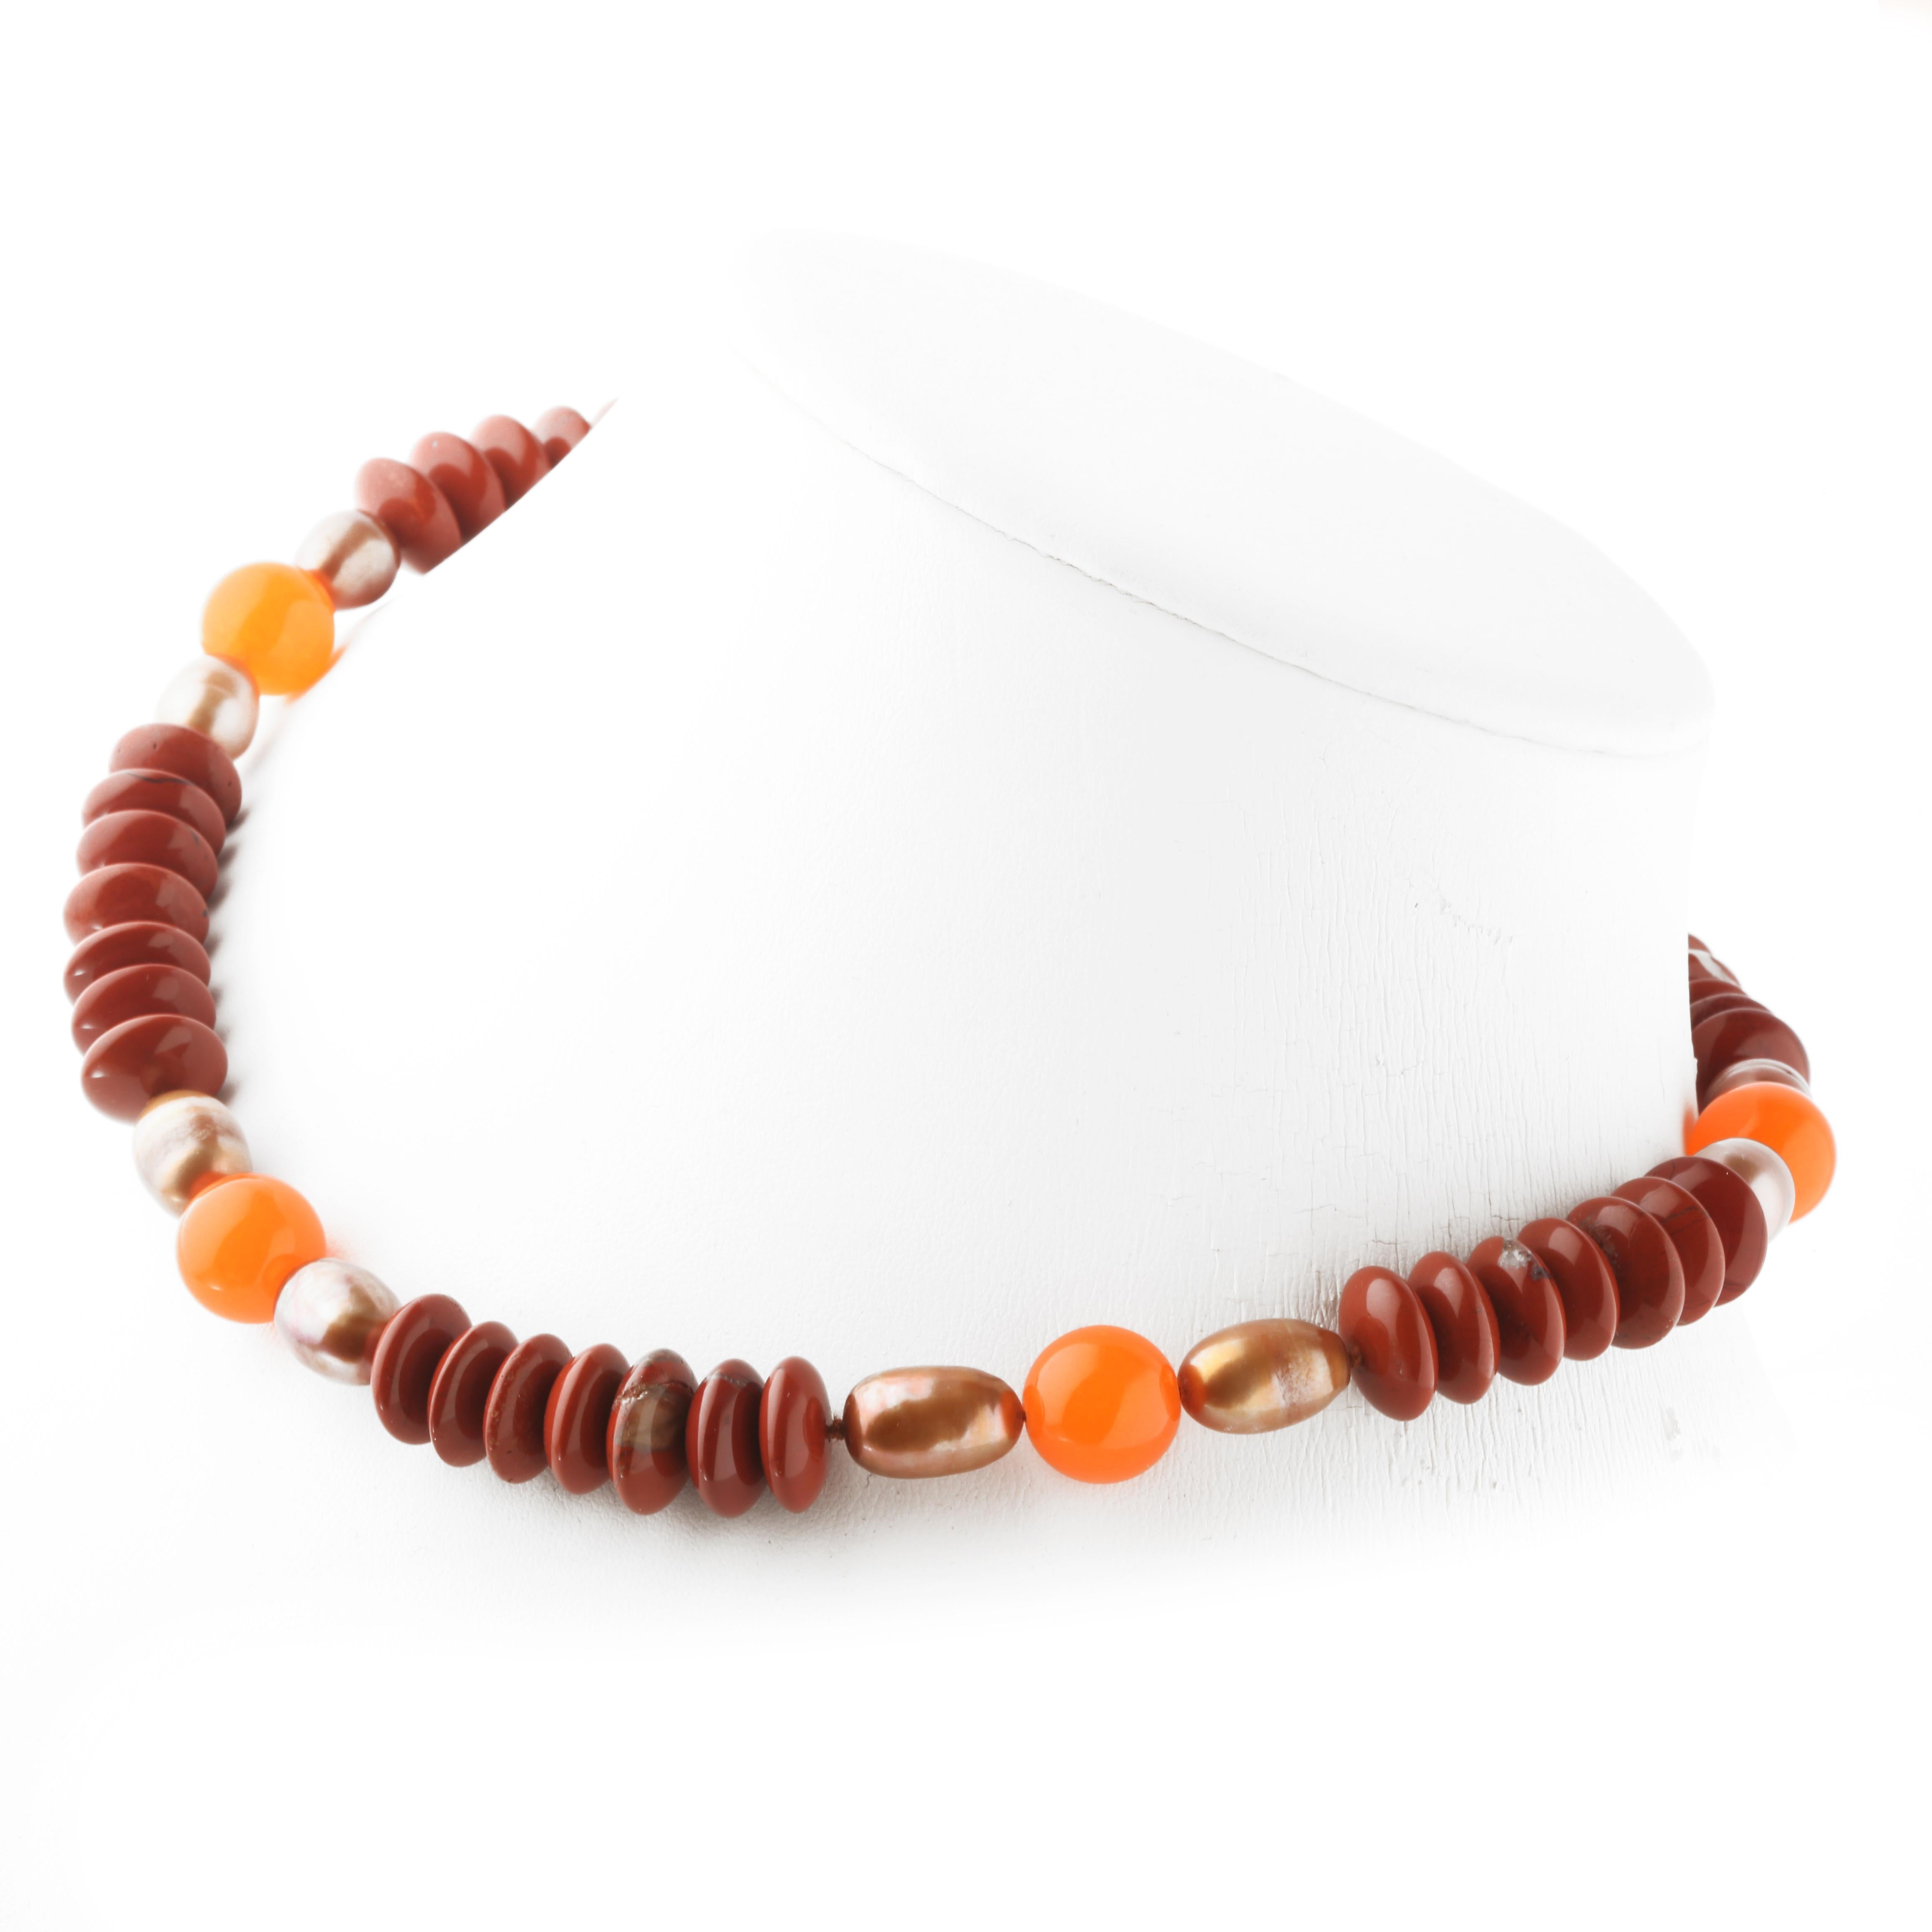 Hard stones jewellery, set on a unique and marvellous design for a light and everyday necklace, featuring Jasper, Agate and Pearls.
The perfect accessory for your Autumn outfits.

• 925 sterling silver lobster closure
• Red Jasper rondelles 1.2 cm
•